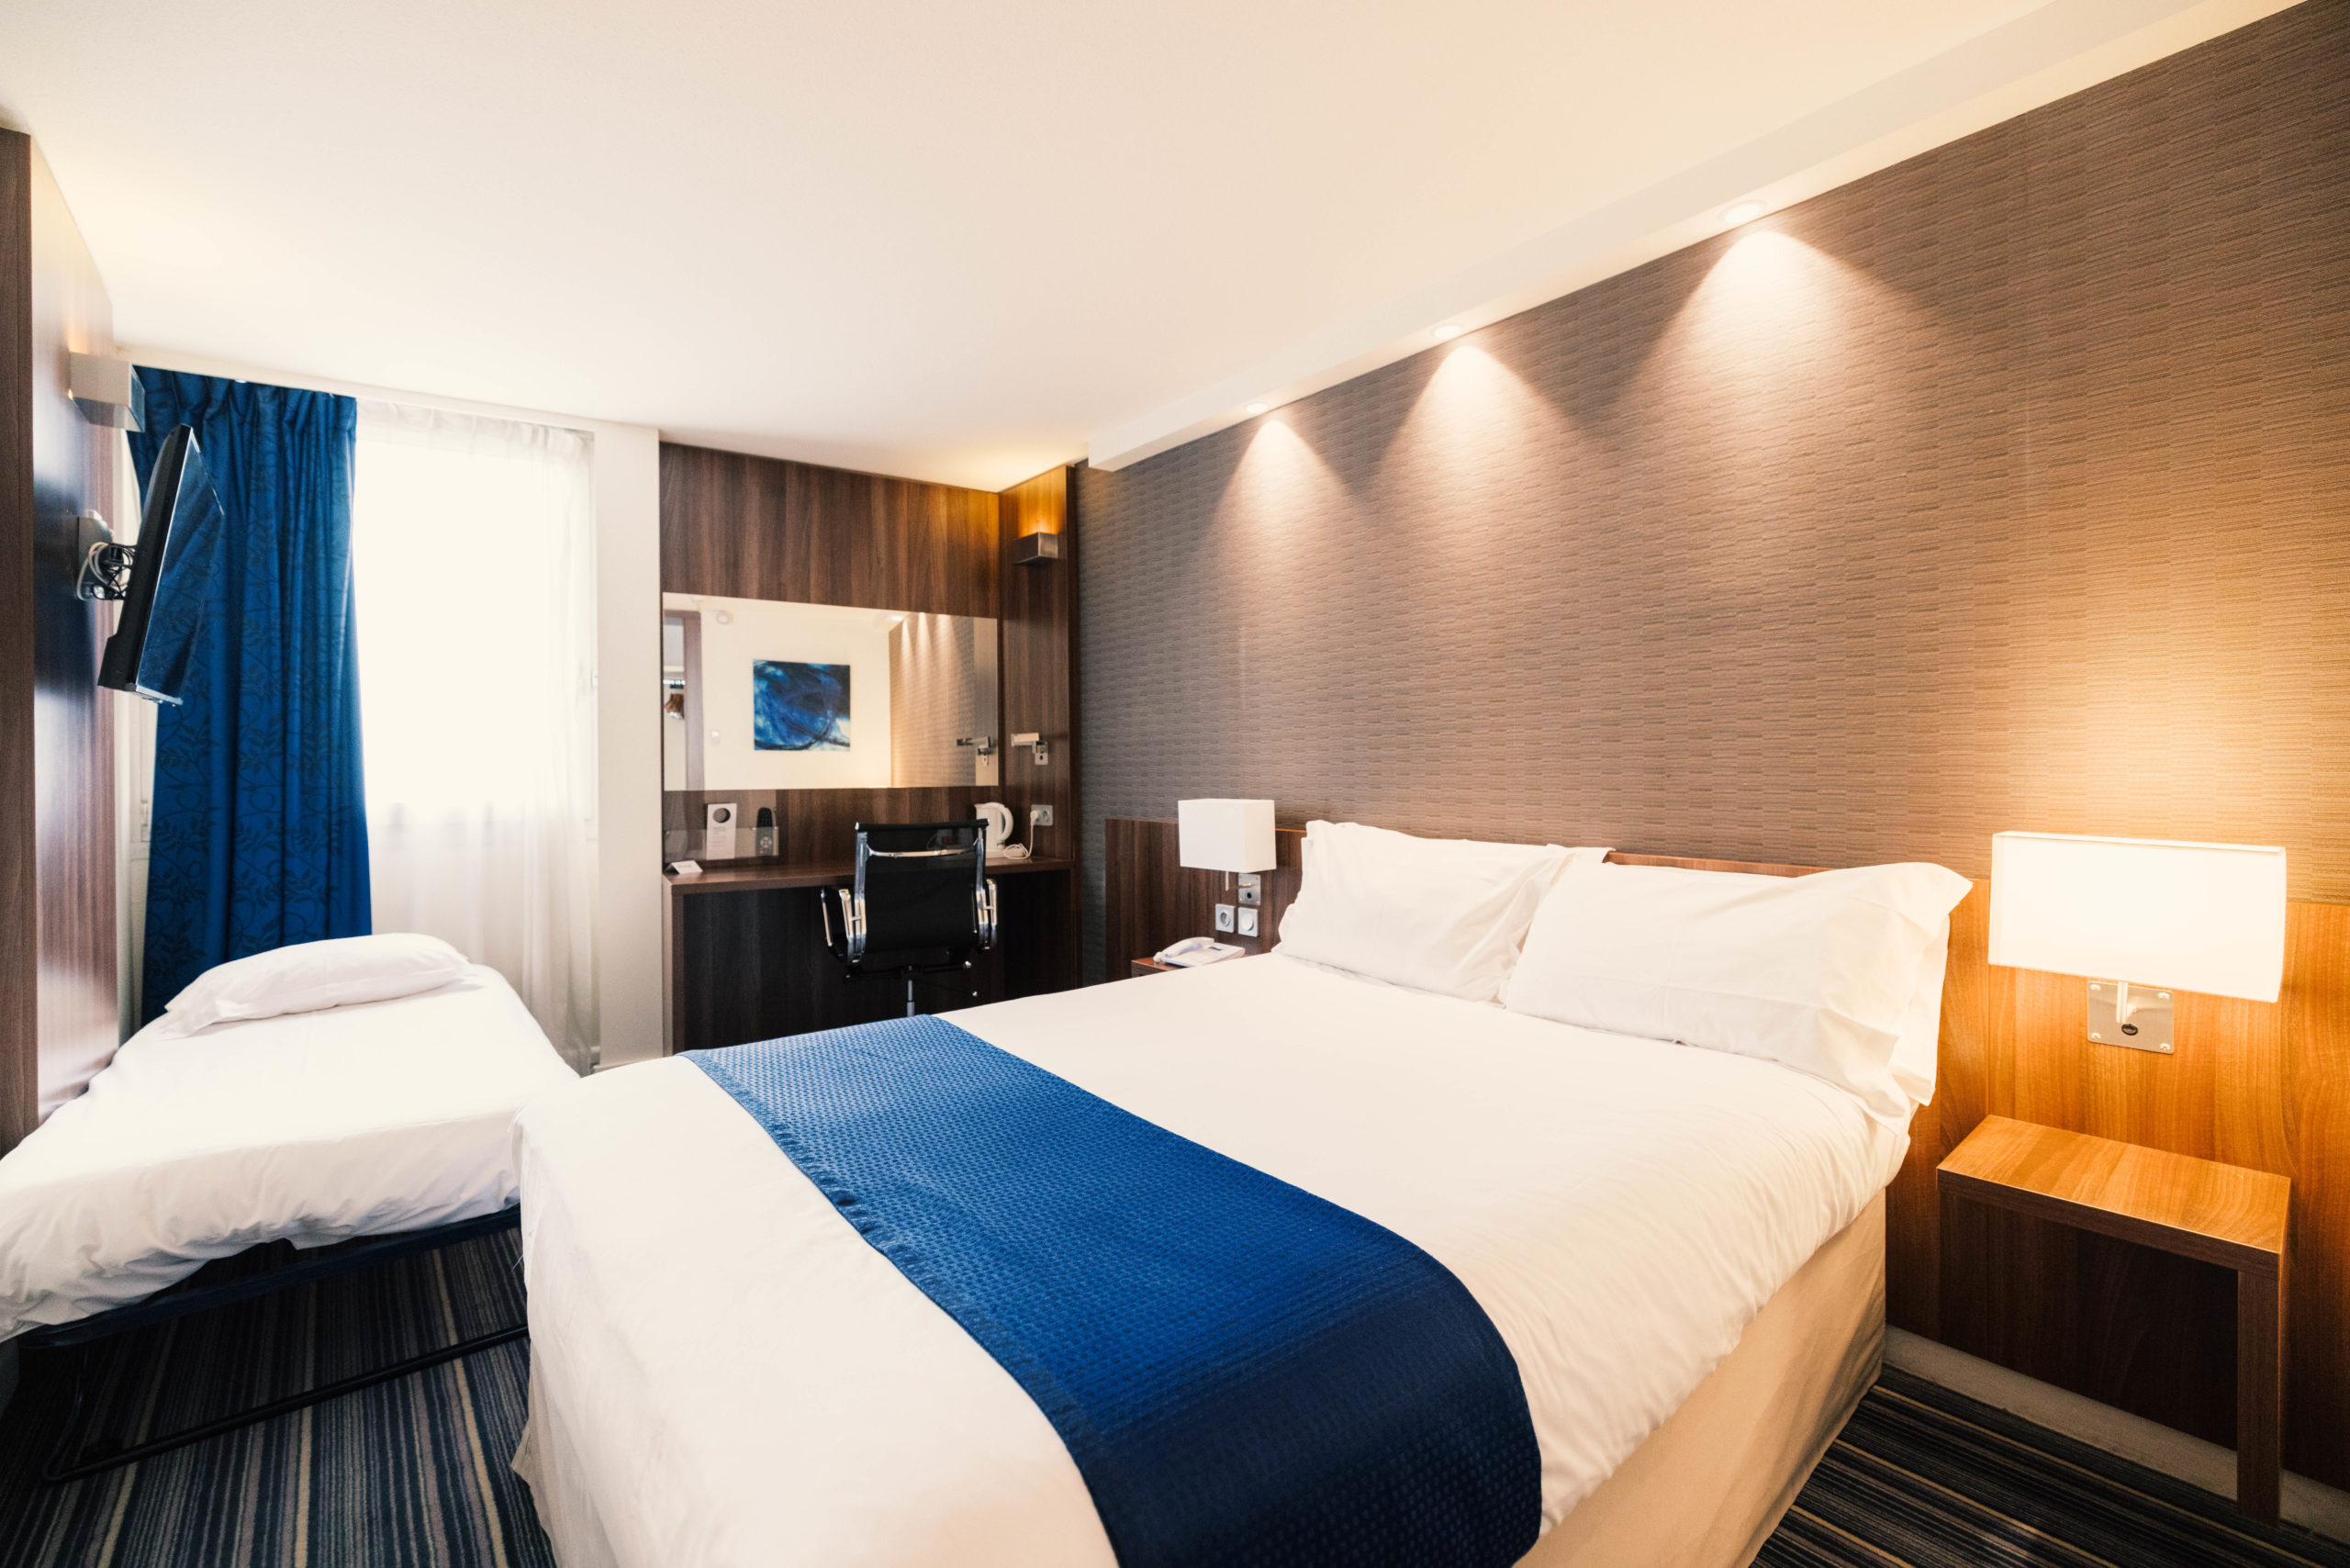 Holiday Inn Express Lille Chambre double standard et lit d'appoint - chambre familiale